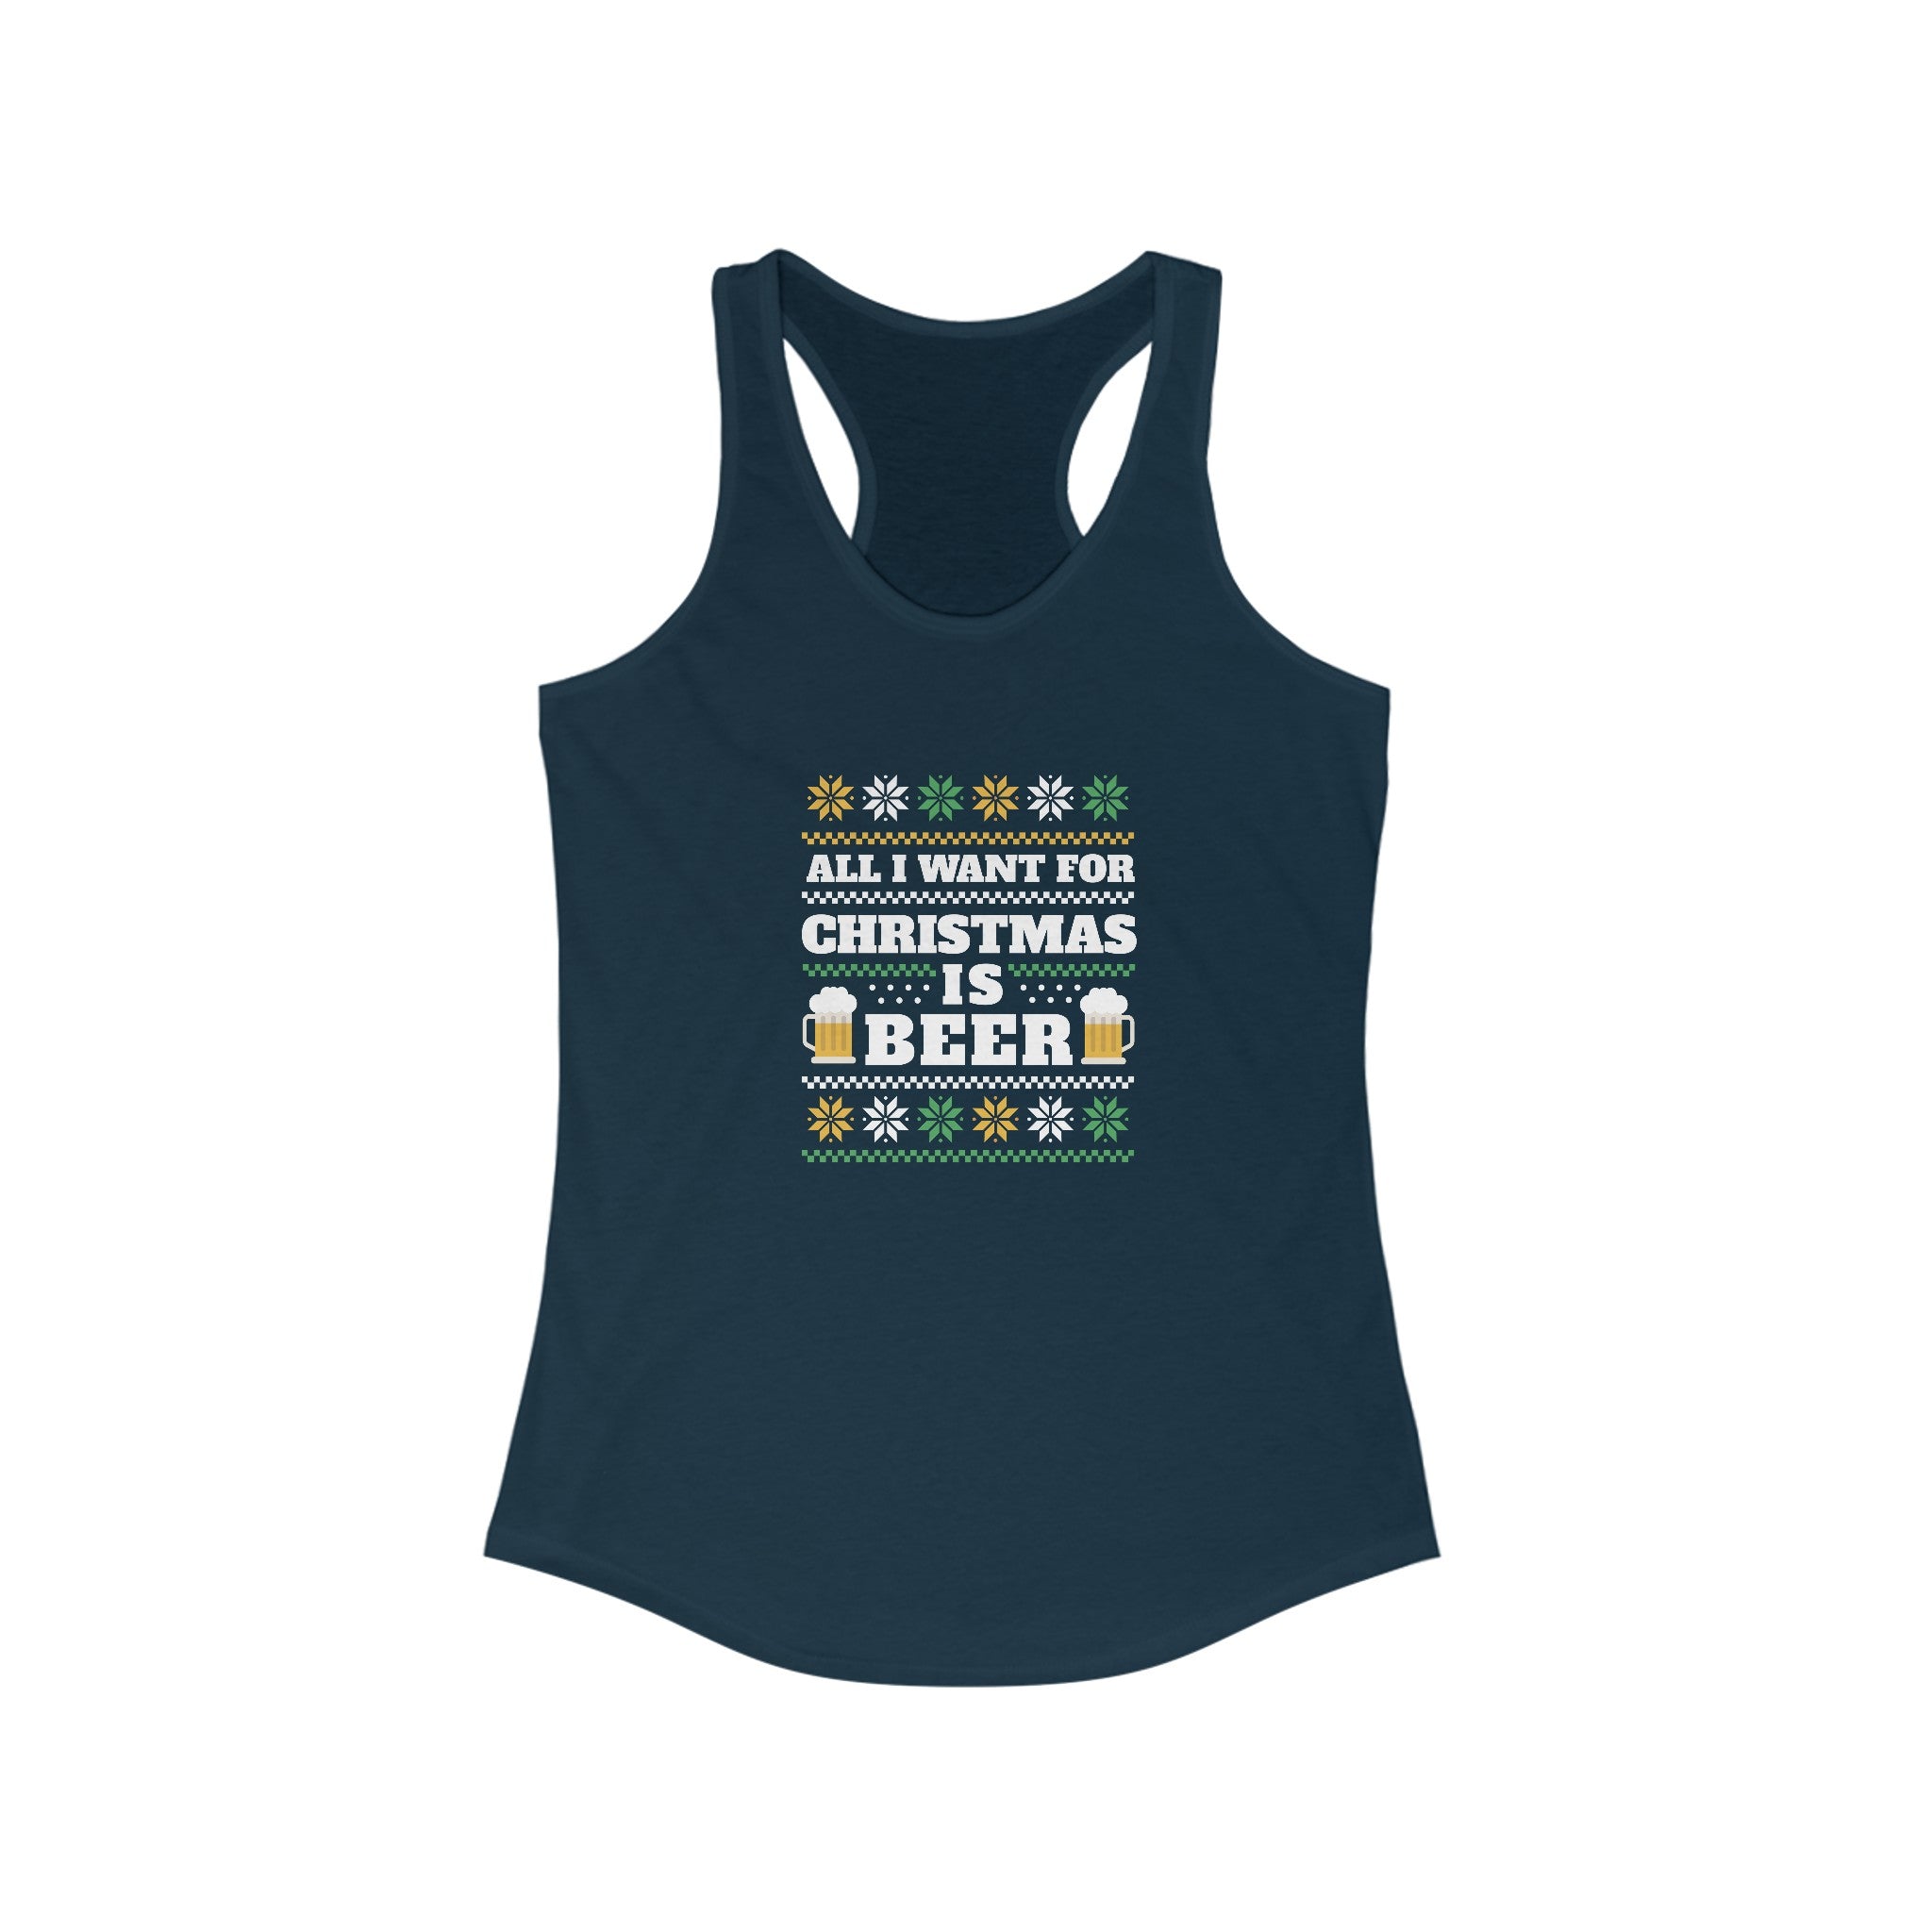 Dark blue Beer Ugly Sweater - Women's Racerback Tank featuring the text "All I Want for Christmas is Beer" with decorative elements, beer mug graphics—perfect for adding a touch of festive beer ugly sweater style to your active lifestyle.